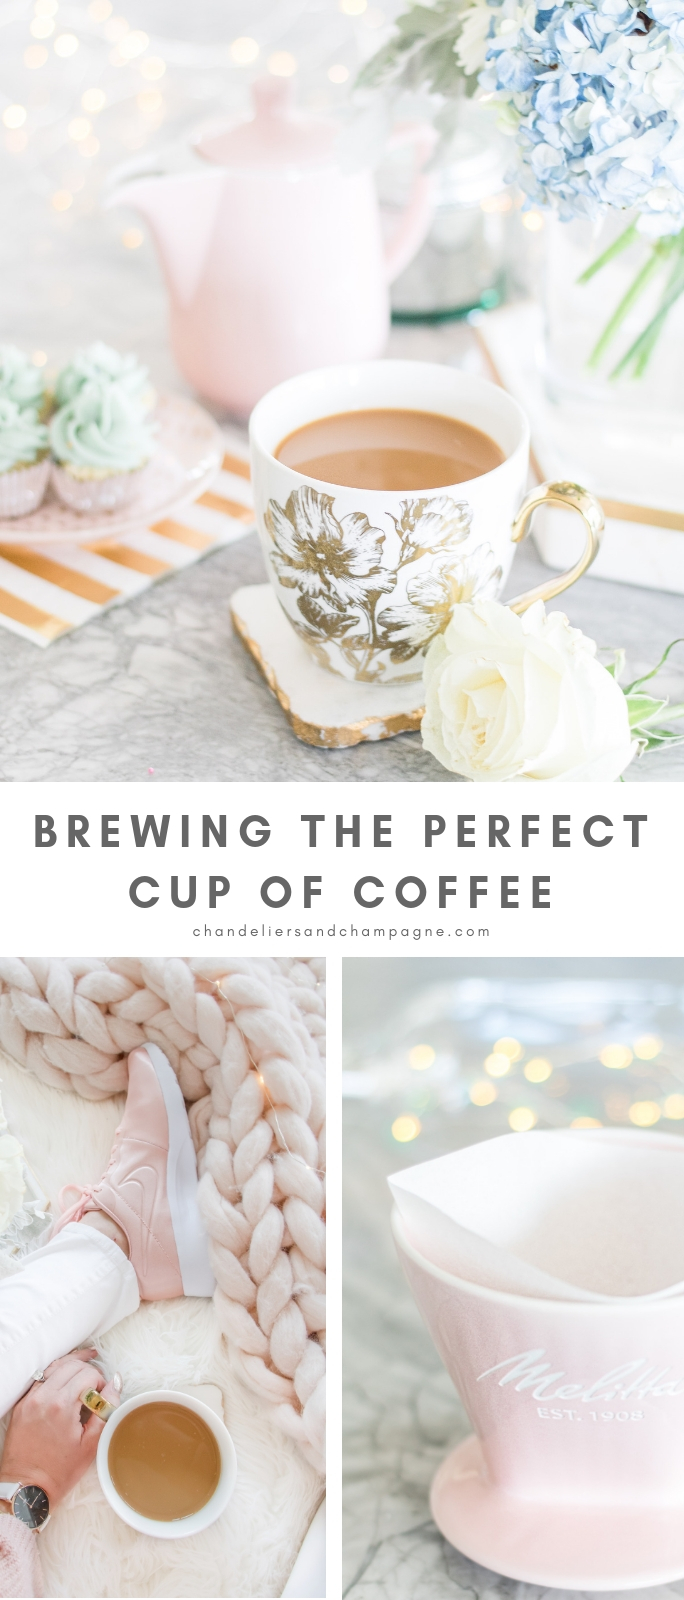 Brewing the perfect cup of coffee - tips to make the perfect coffee - Coffee love